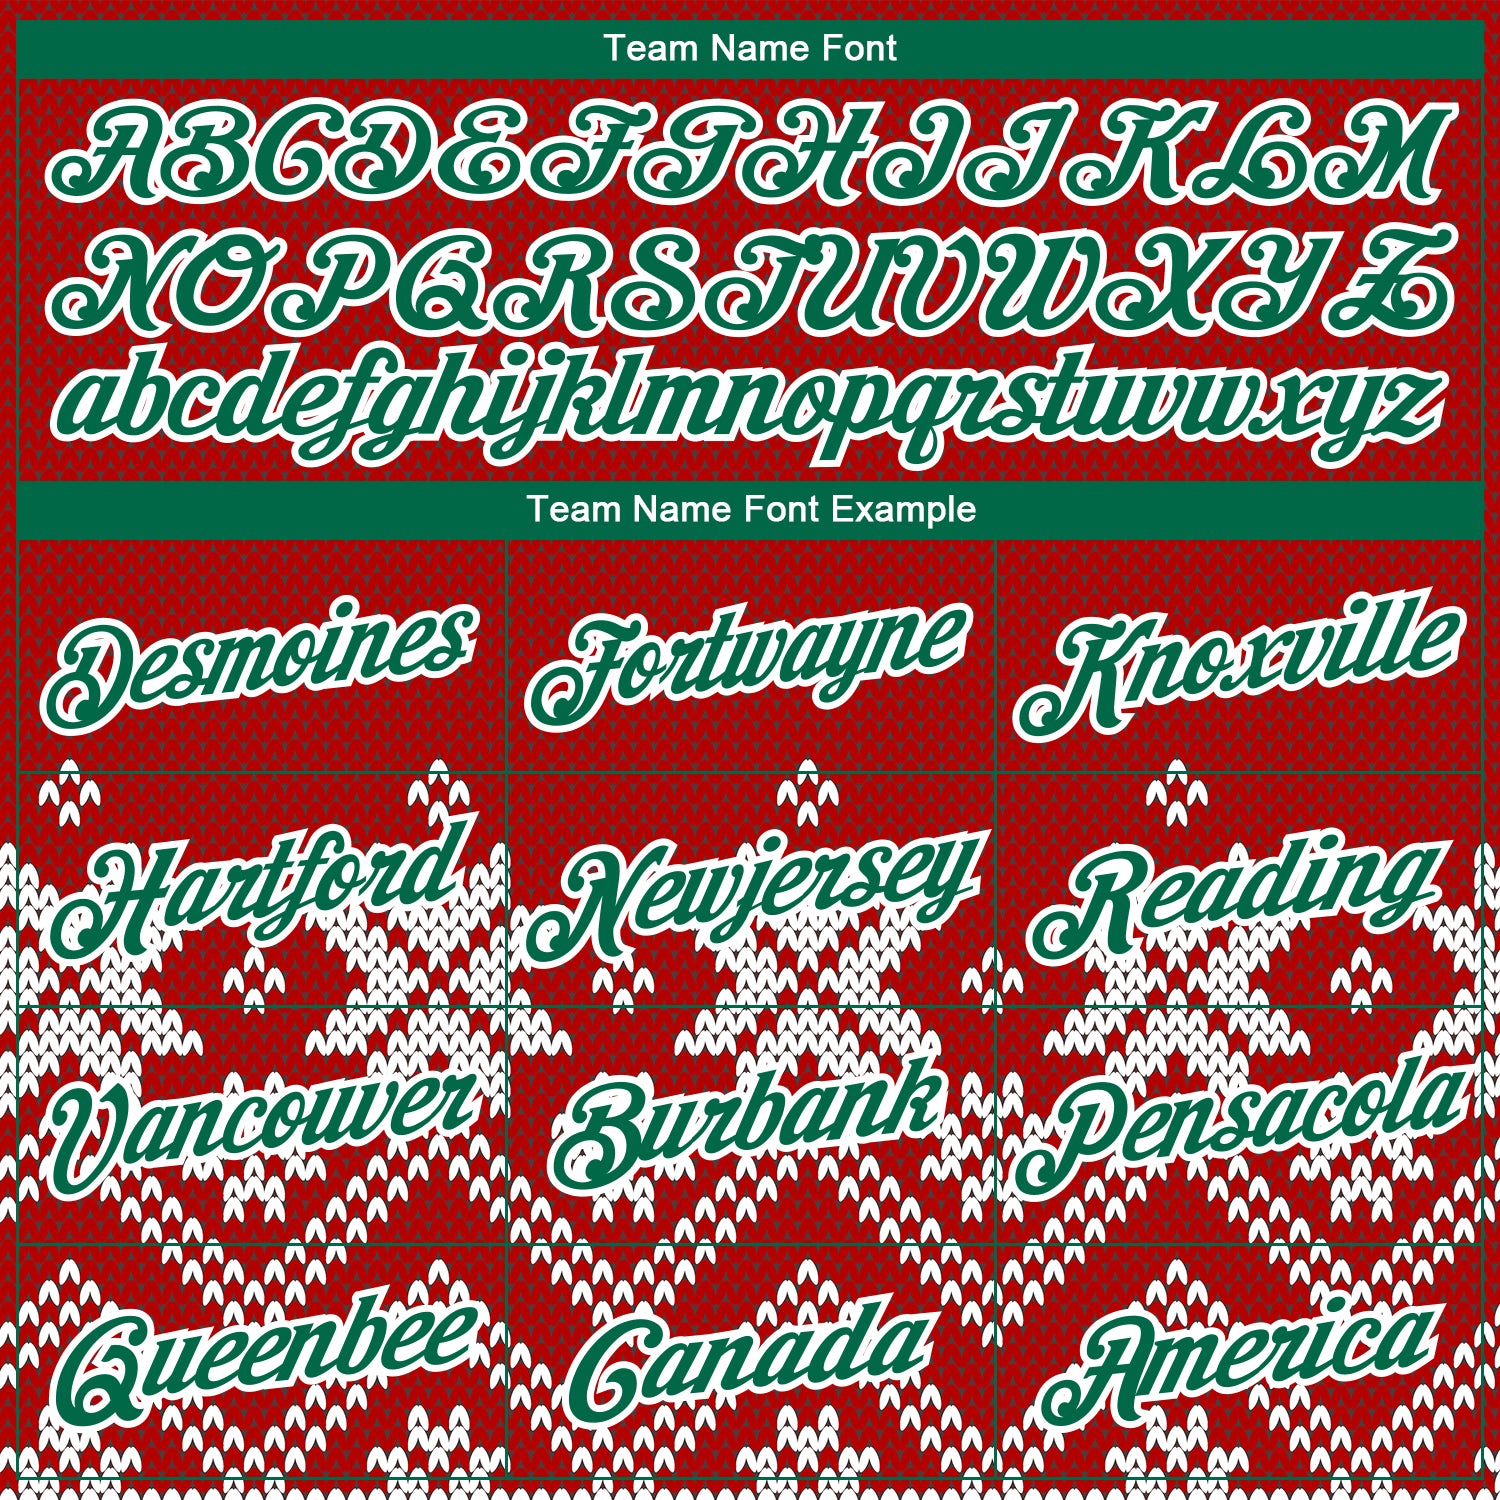 Custom Stitched Red Kelly Green-White Christmas Snowflakes 3D Sports Pullover Sweatshirt Hoodie